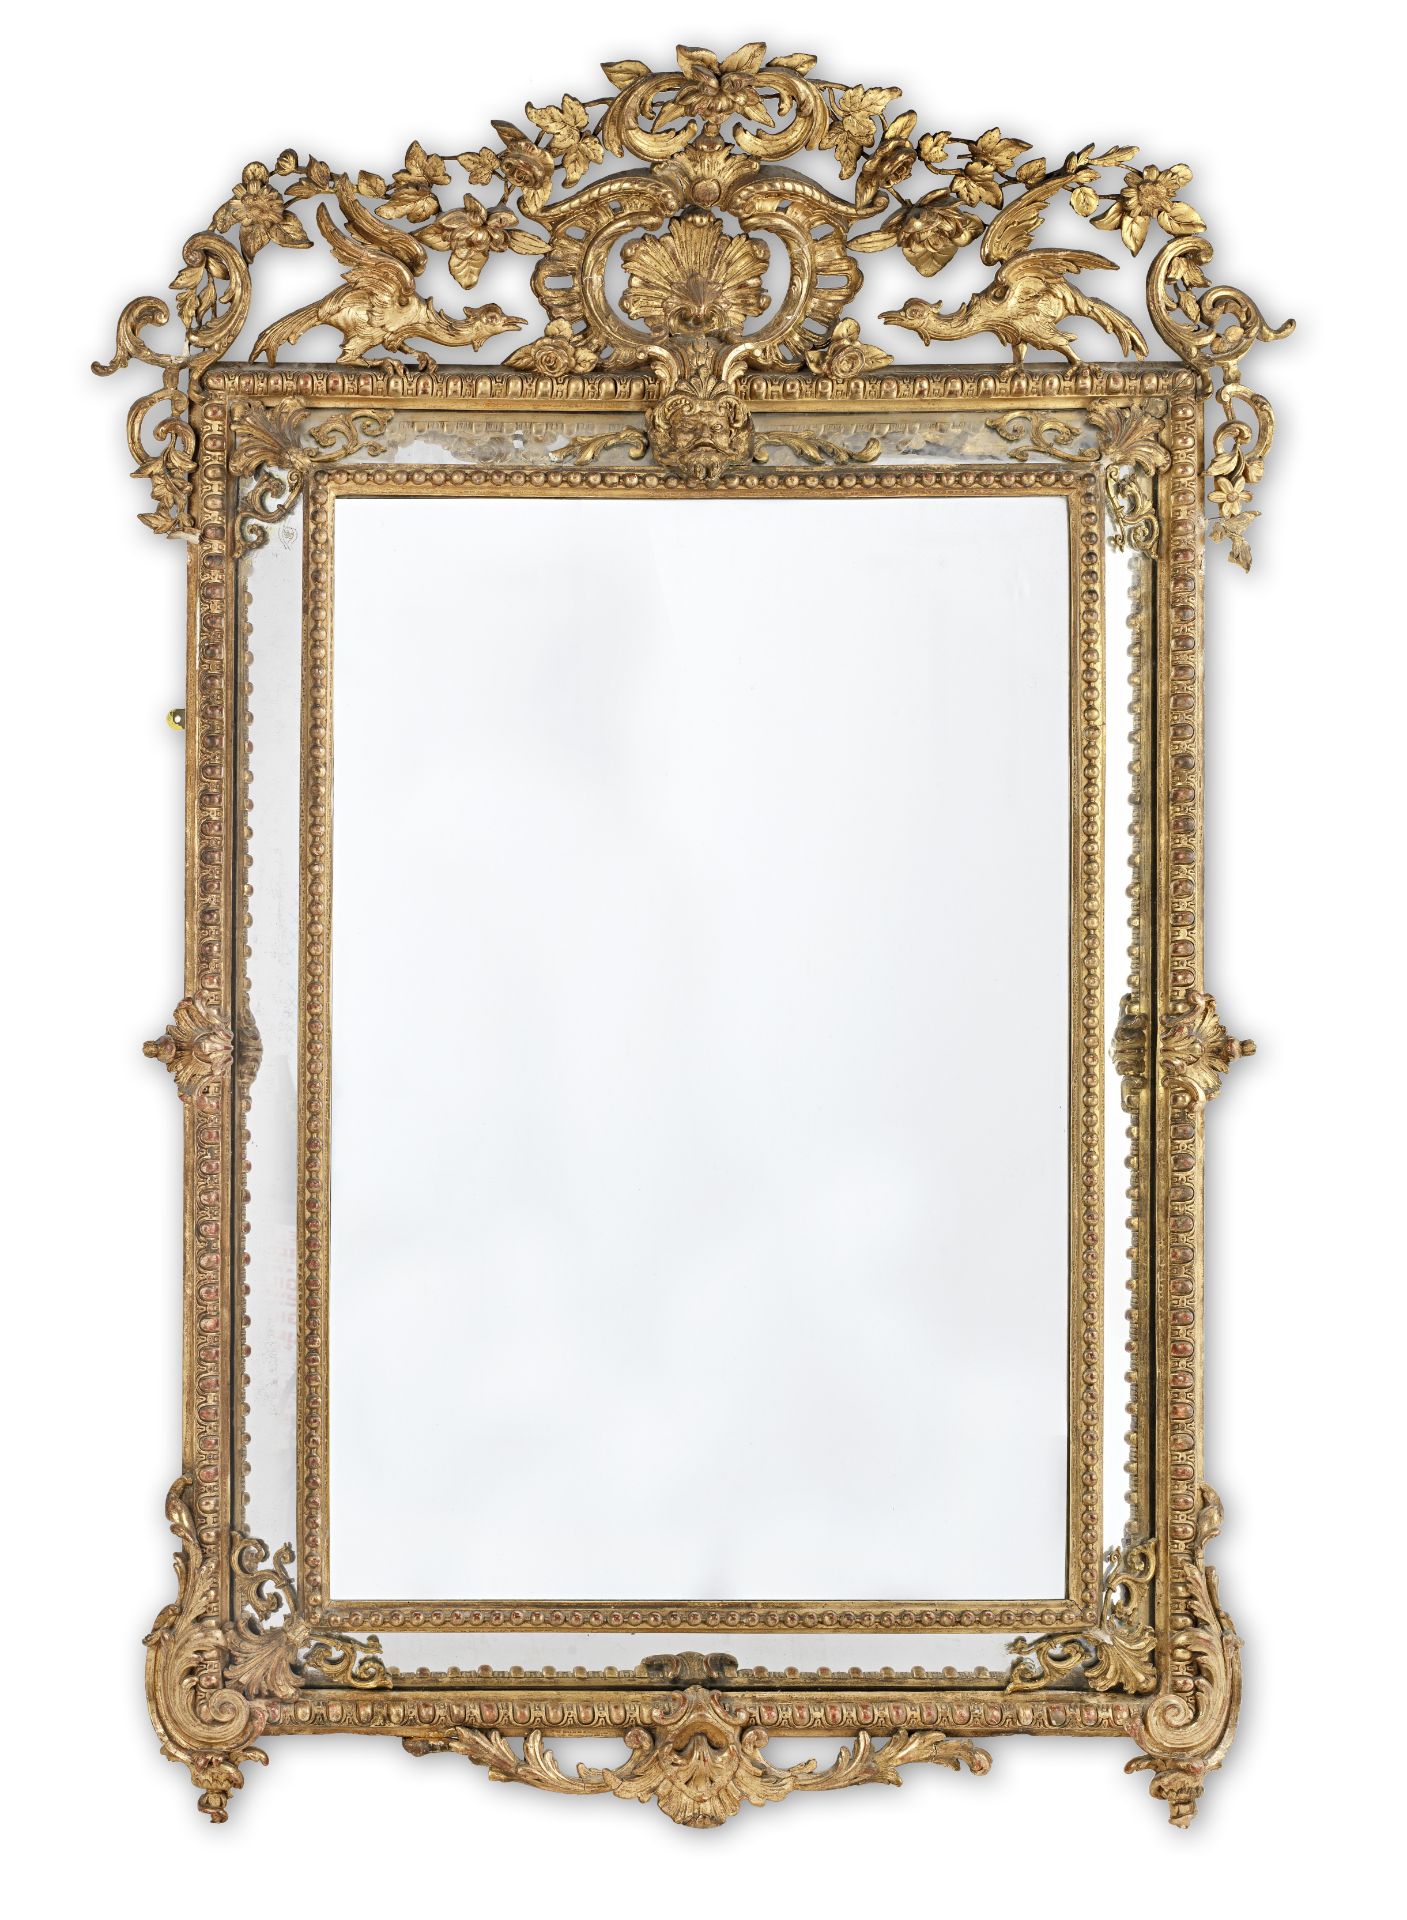 A French 19th century giltwood and gilt composition marginal mirror